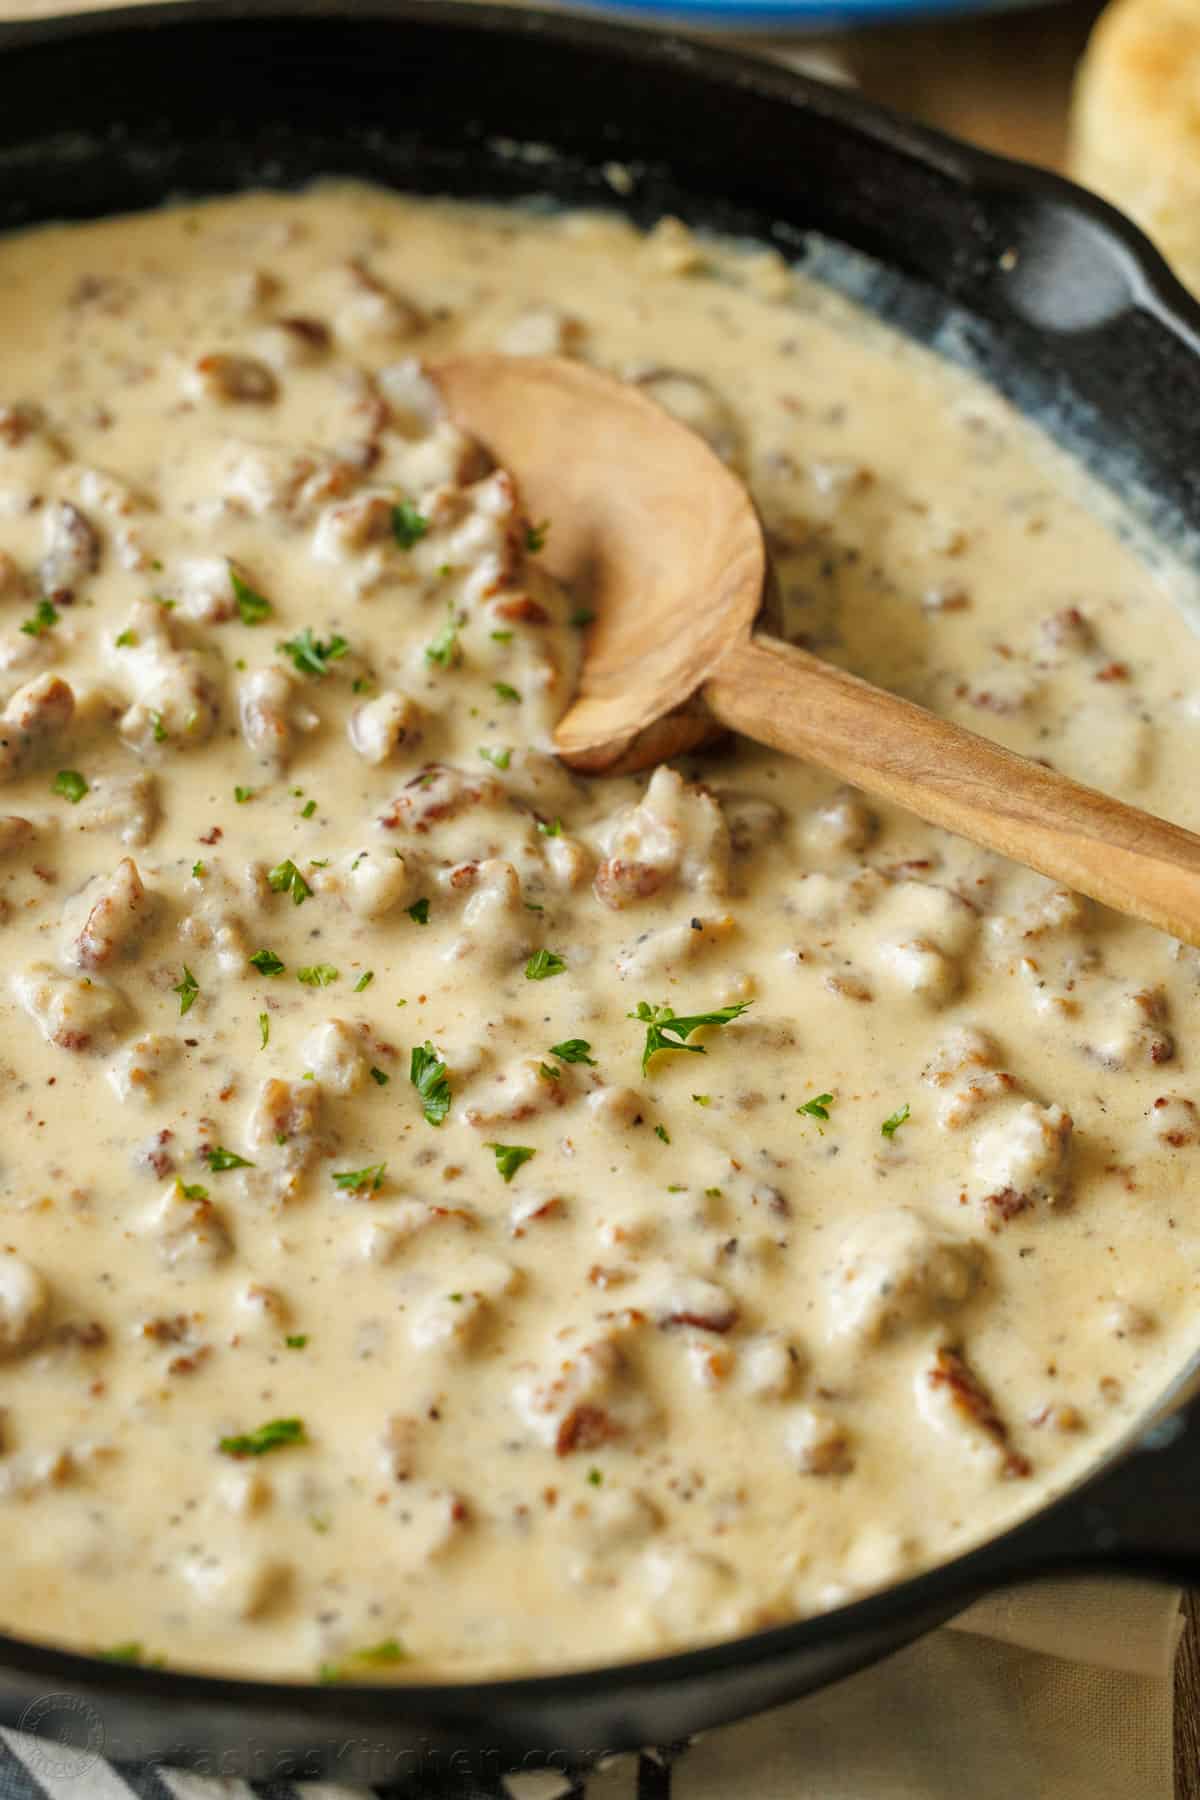 Souther white sauce with pork crumbles in a pan with a wooden spoon